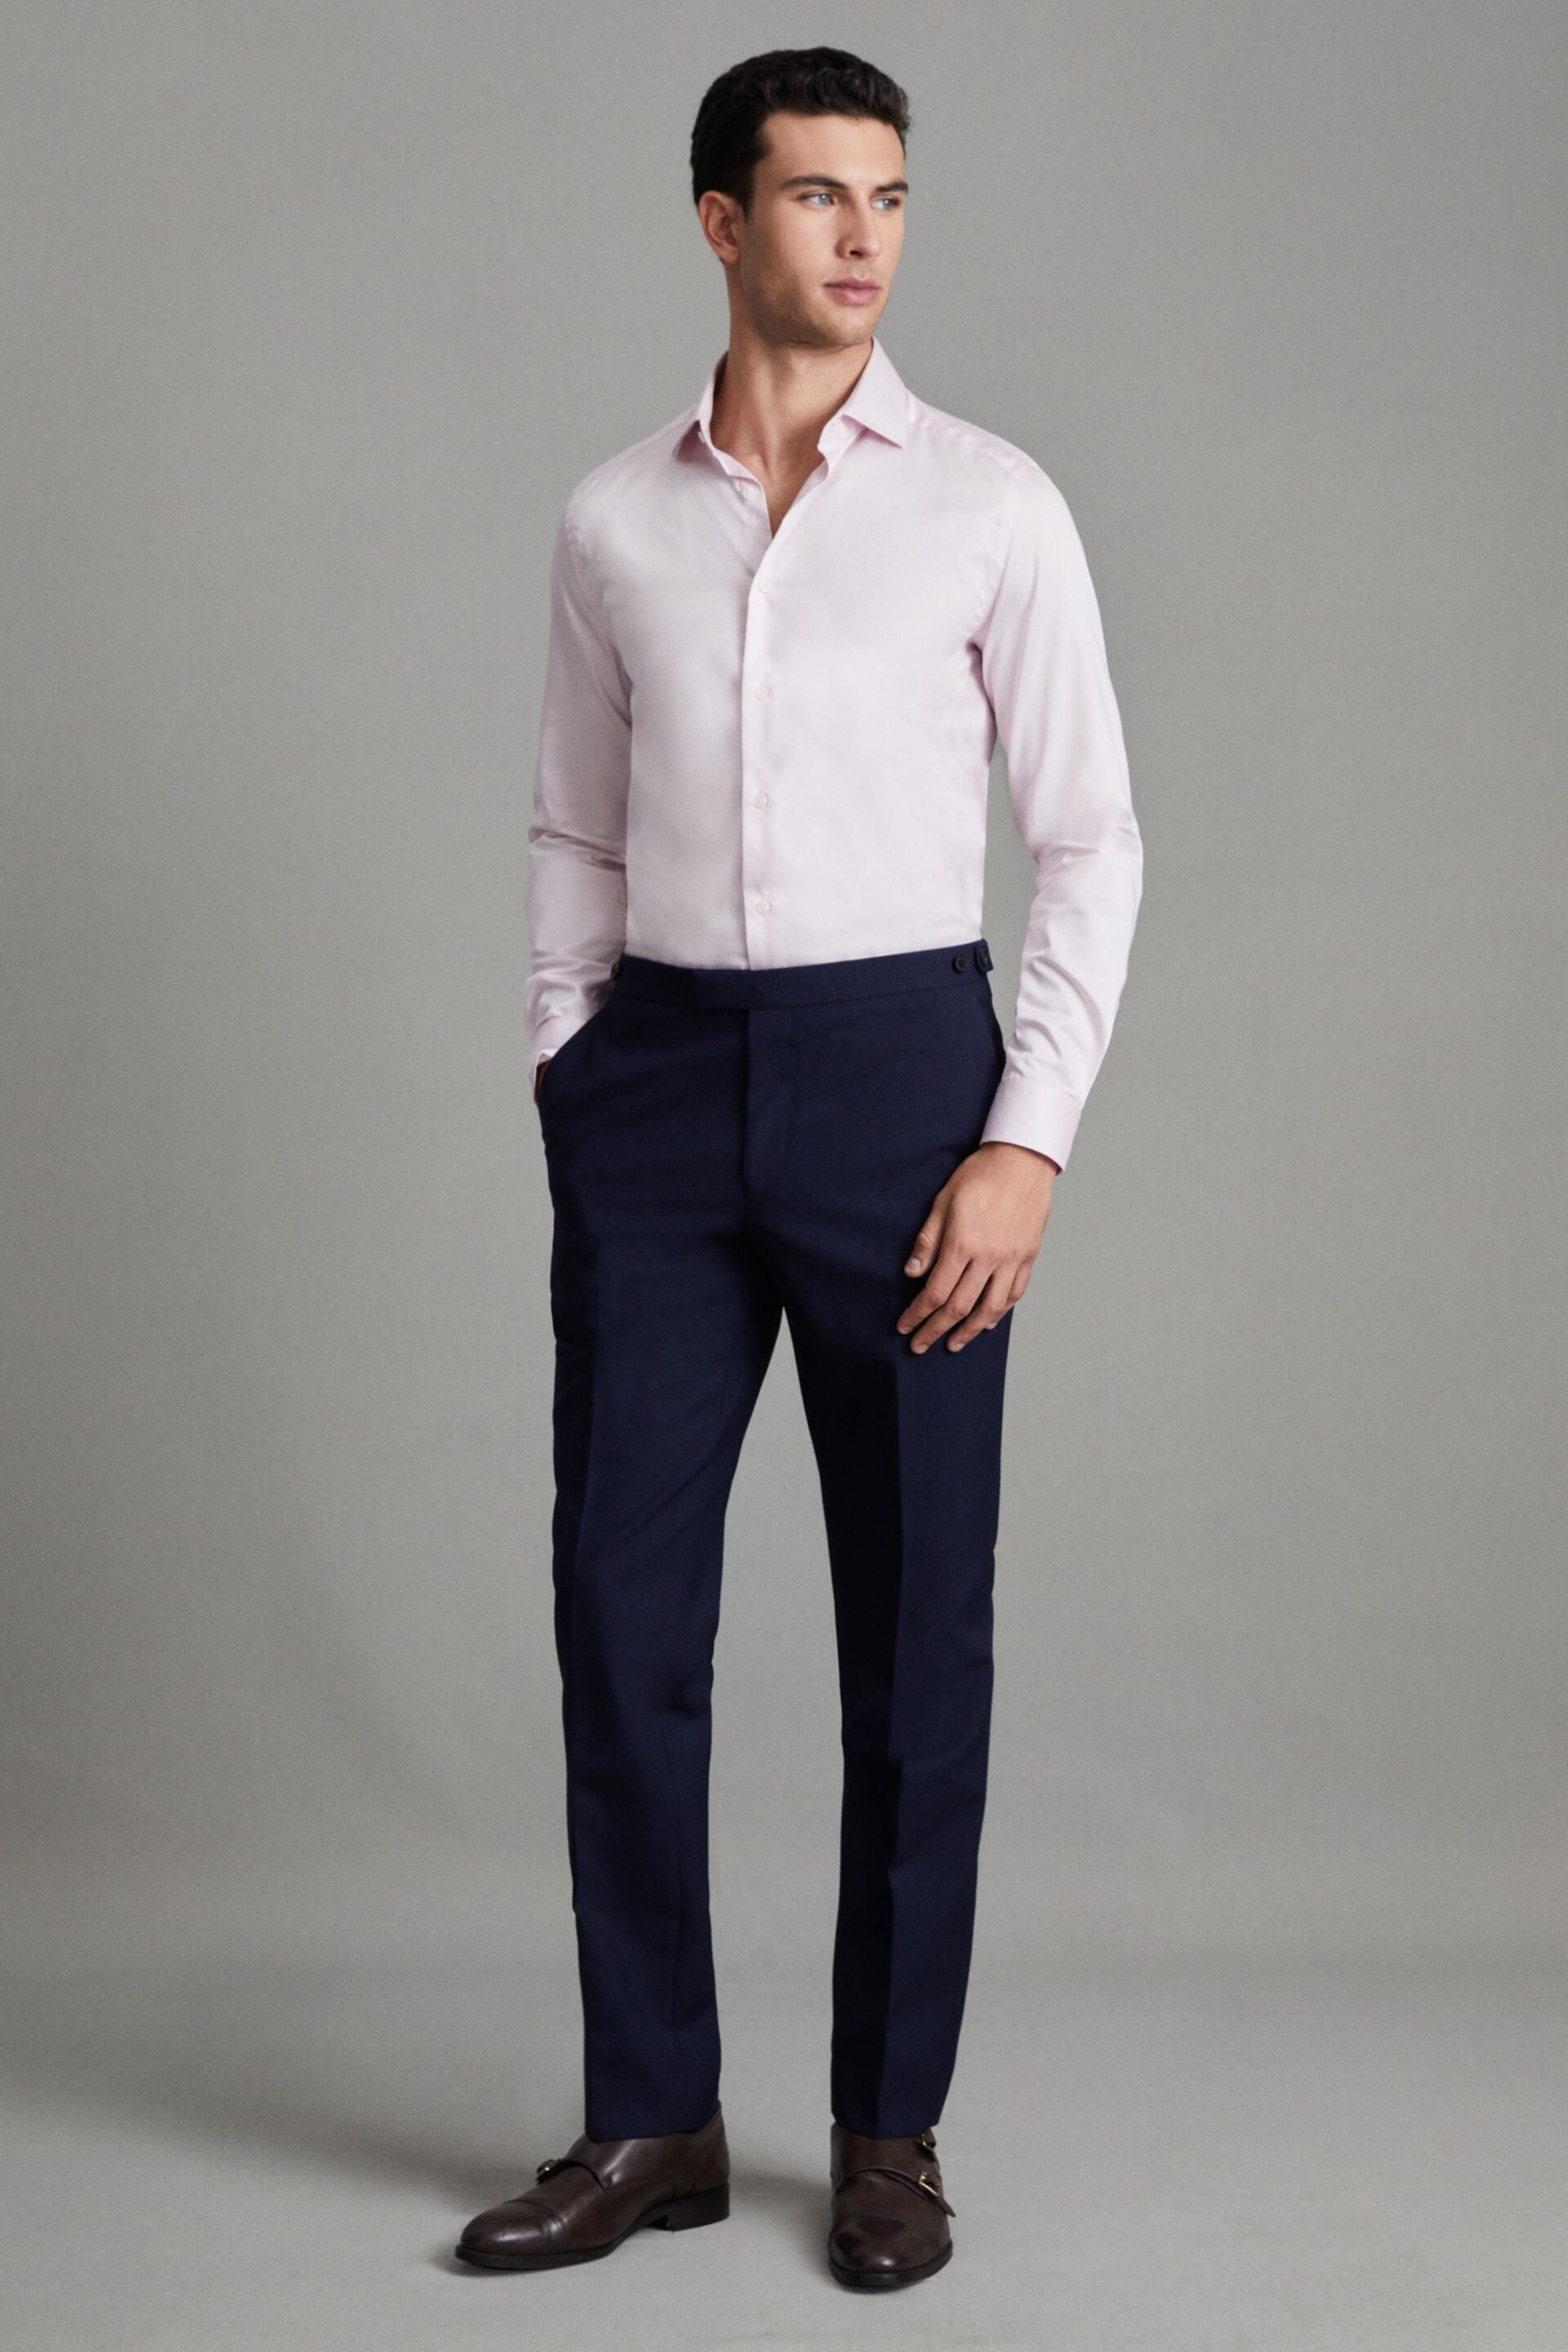 Reiss Pink Remote Slim Fit Cotton Sateen Shirt - Image 3 of 6